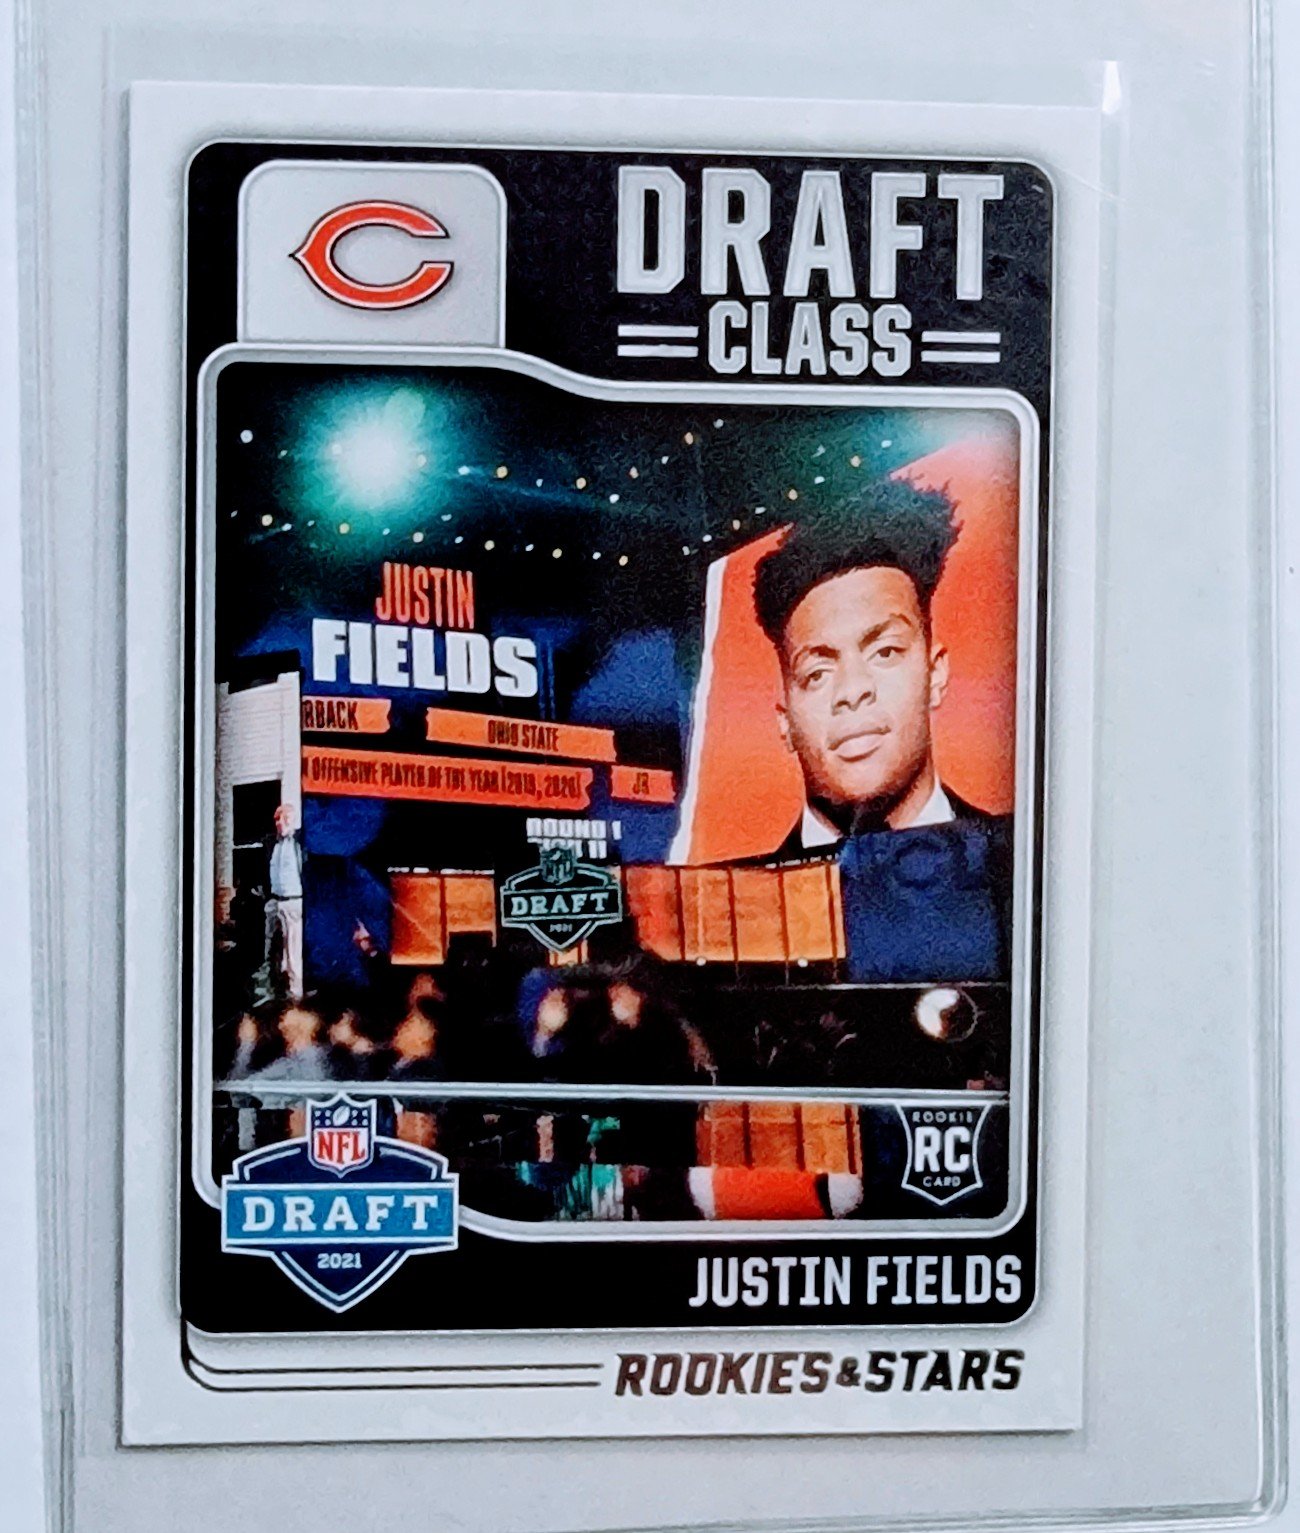 2021 Panini Rookies and Stars Justin Fields Draft Class Rookie Football Card AVM1 simple Xclusive Collectibles   